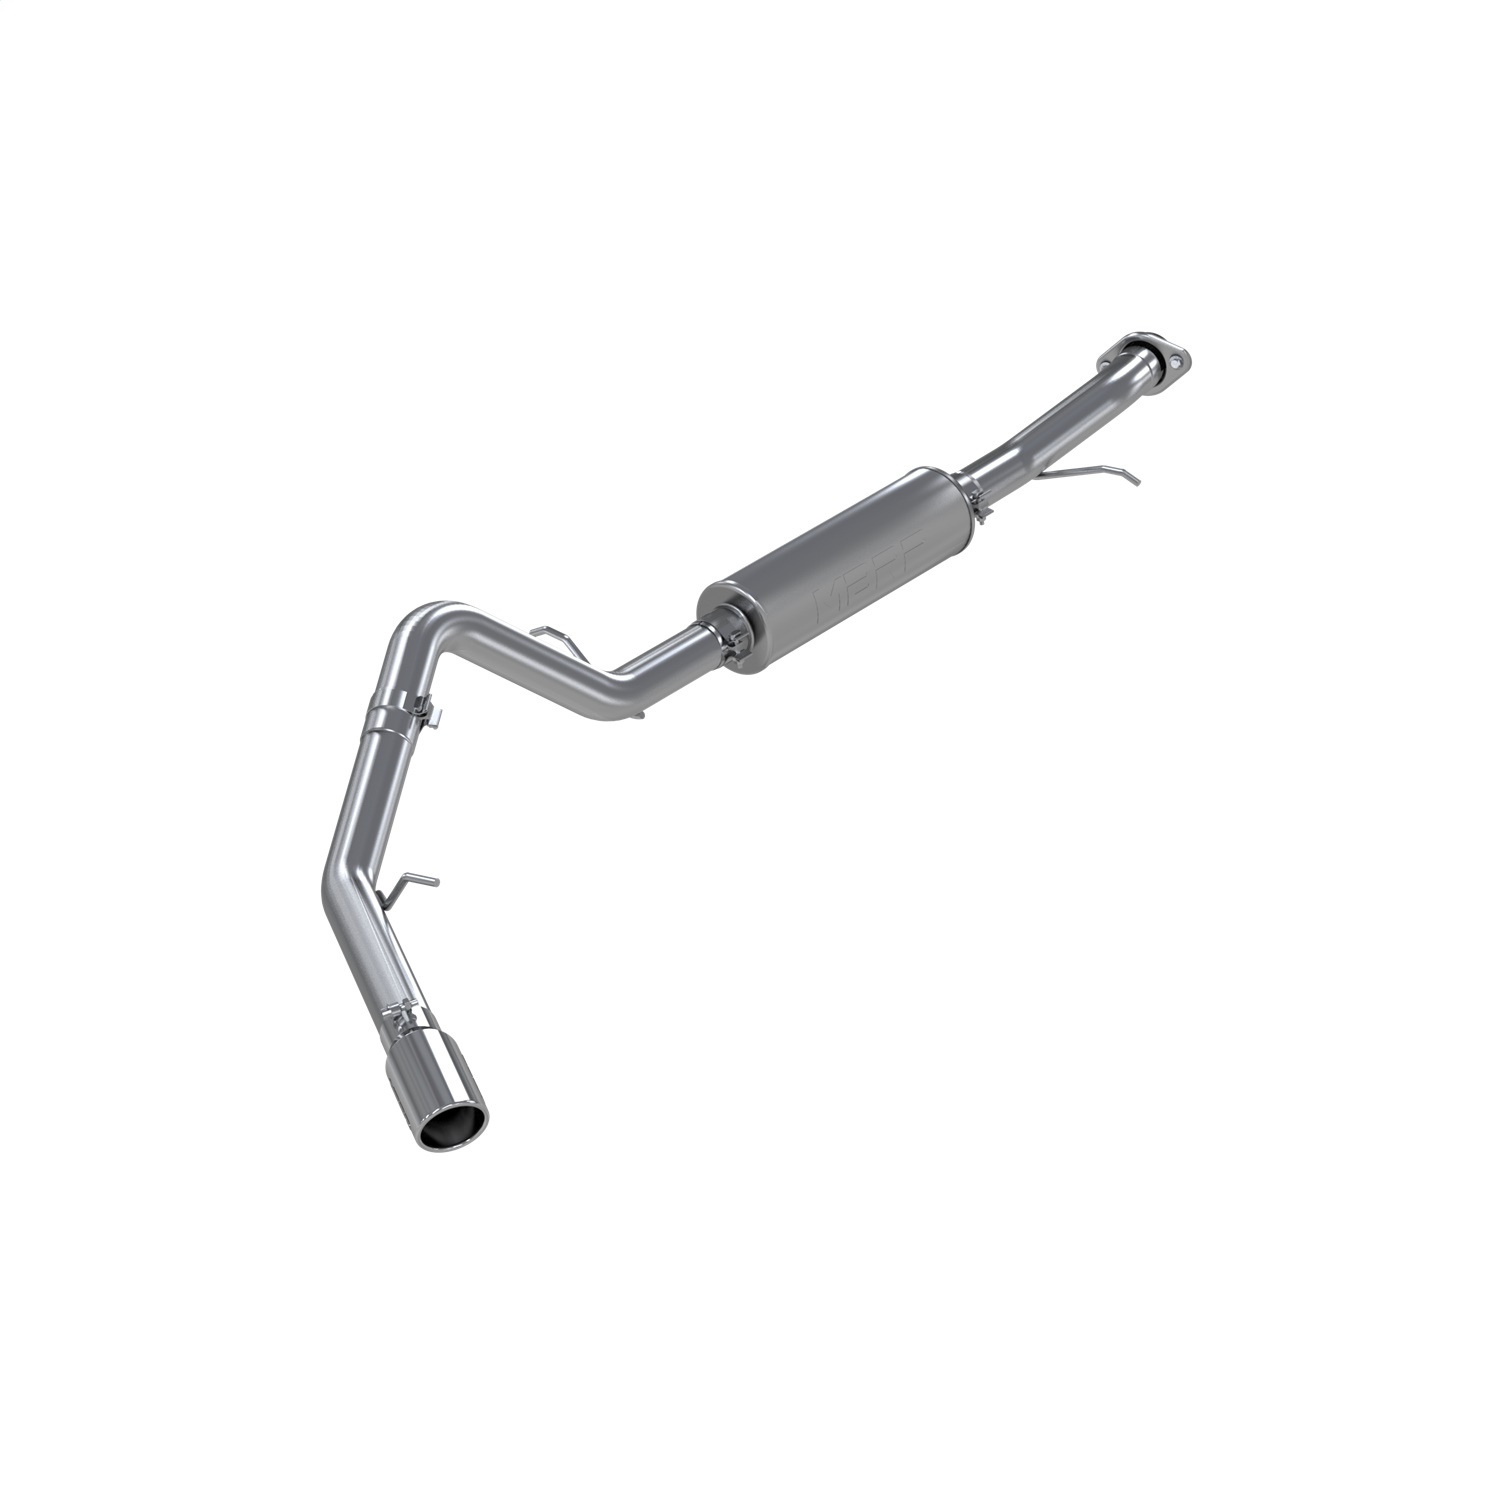 MBRP Exhaust S5026409 Armor Plus Cat Back Exhaust System Fits 00-06 Tahoe Yukon